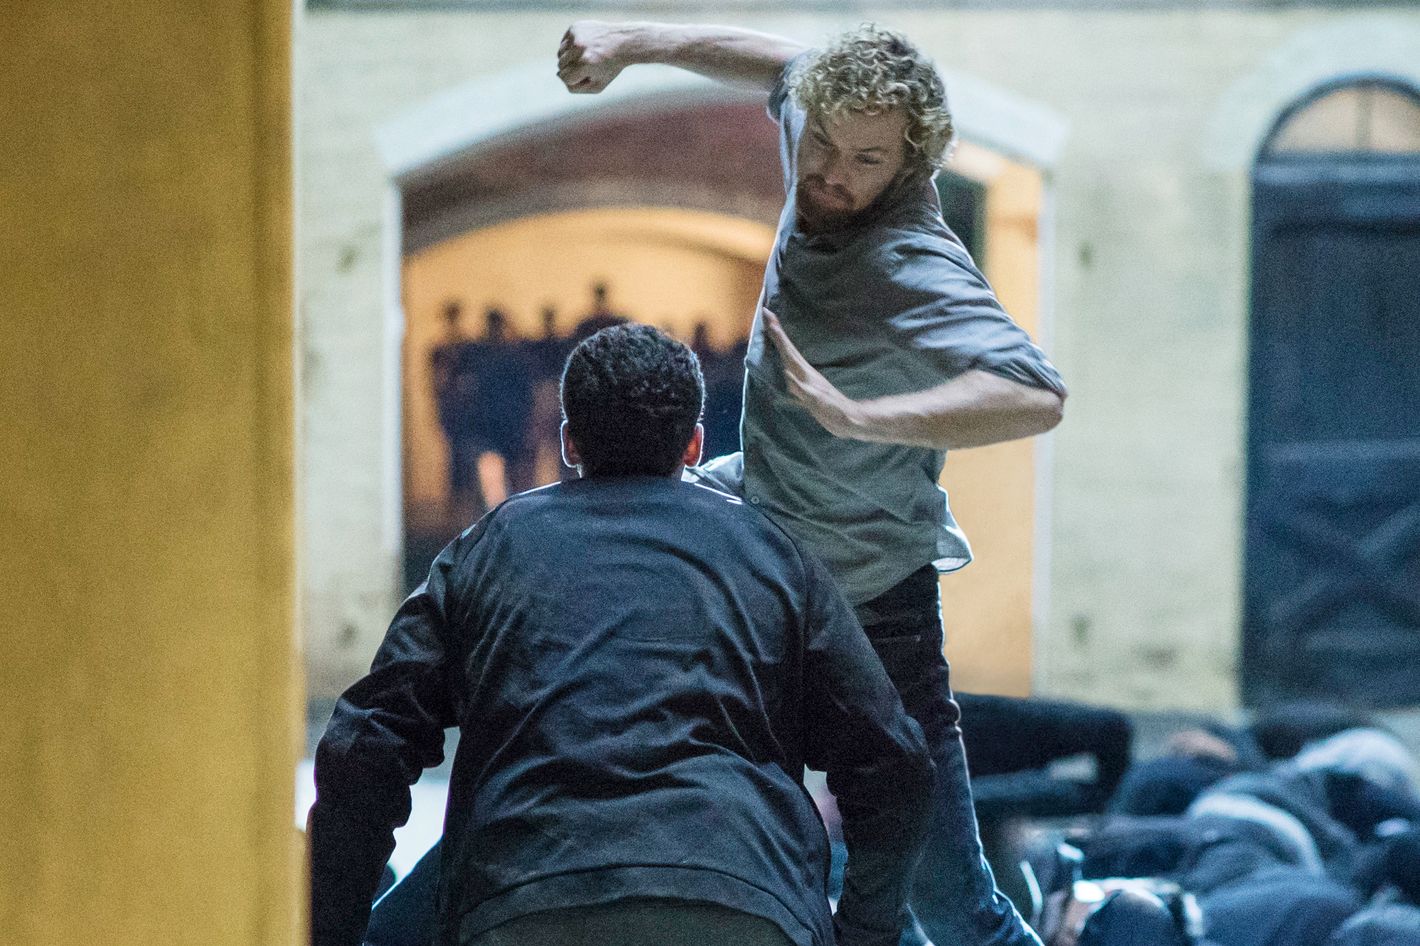 Iron Fist What is Going on Here? - Superheroes - superheroes